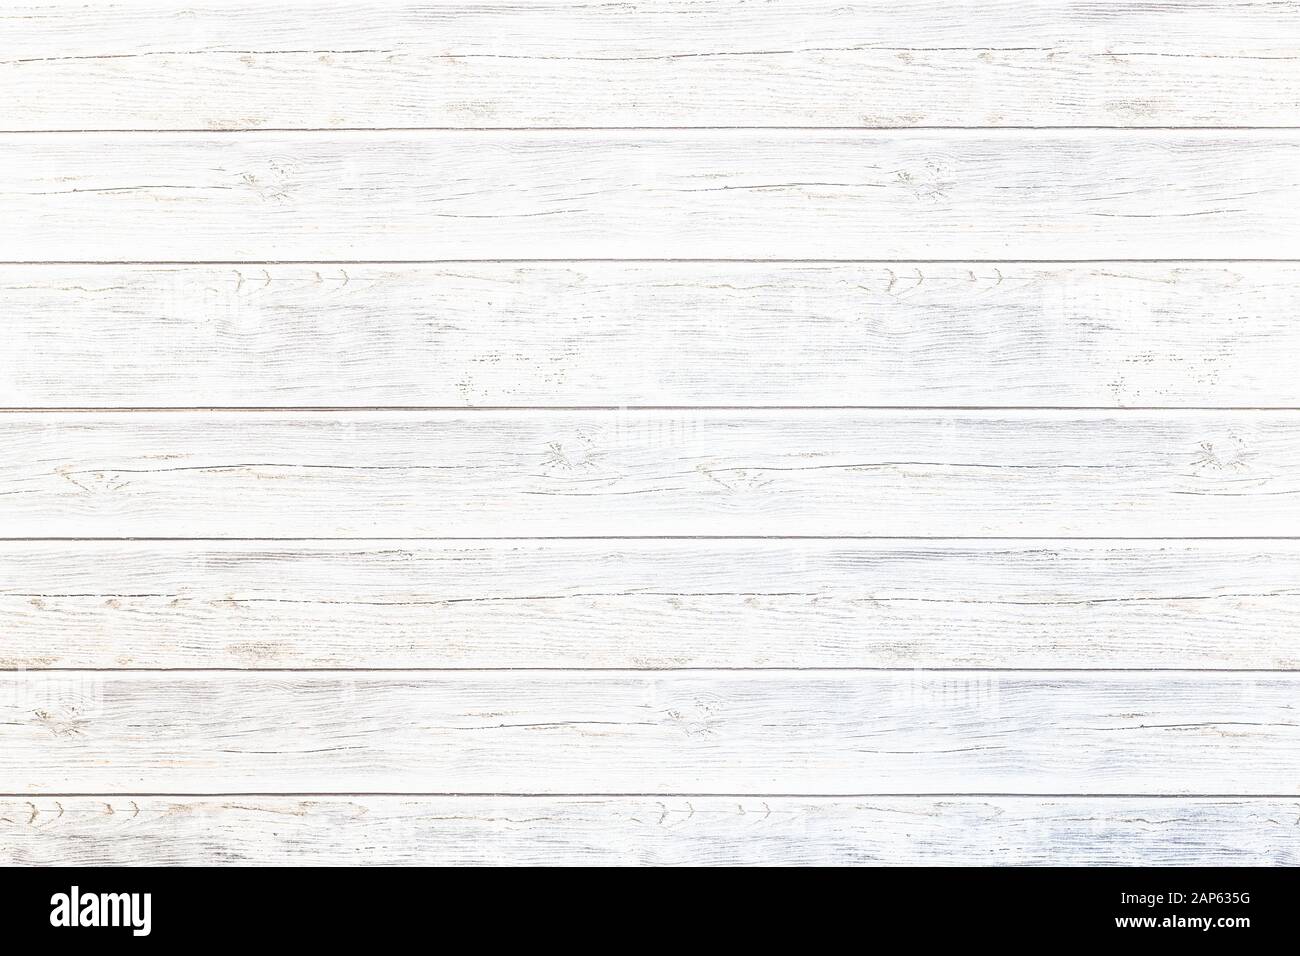 Wood texture backgrounds. High resolution image. Stock Photo